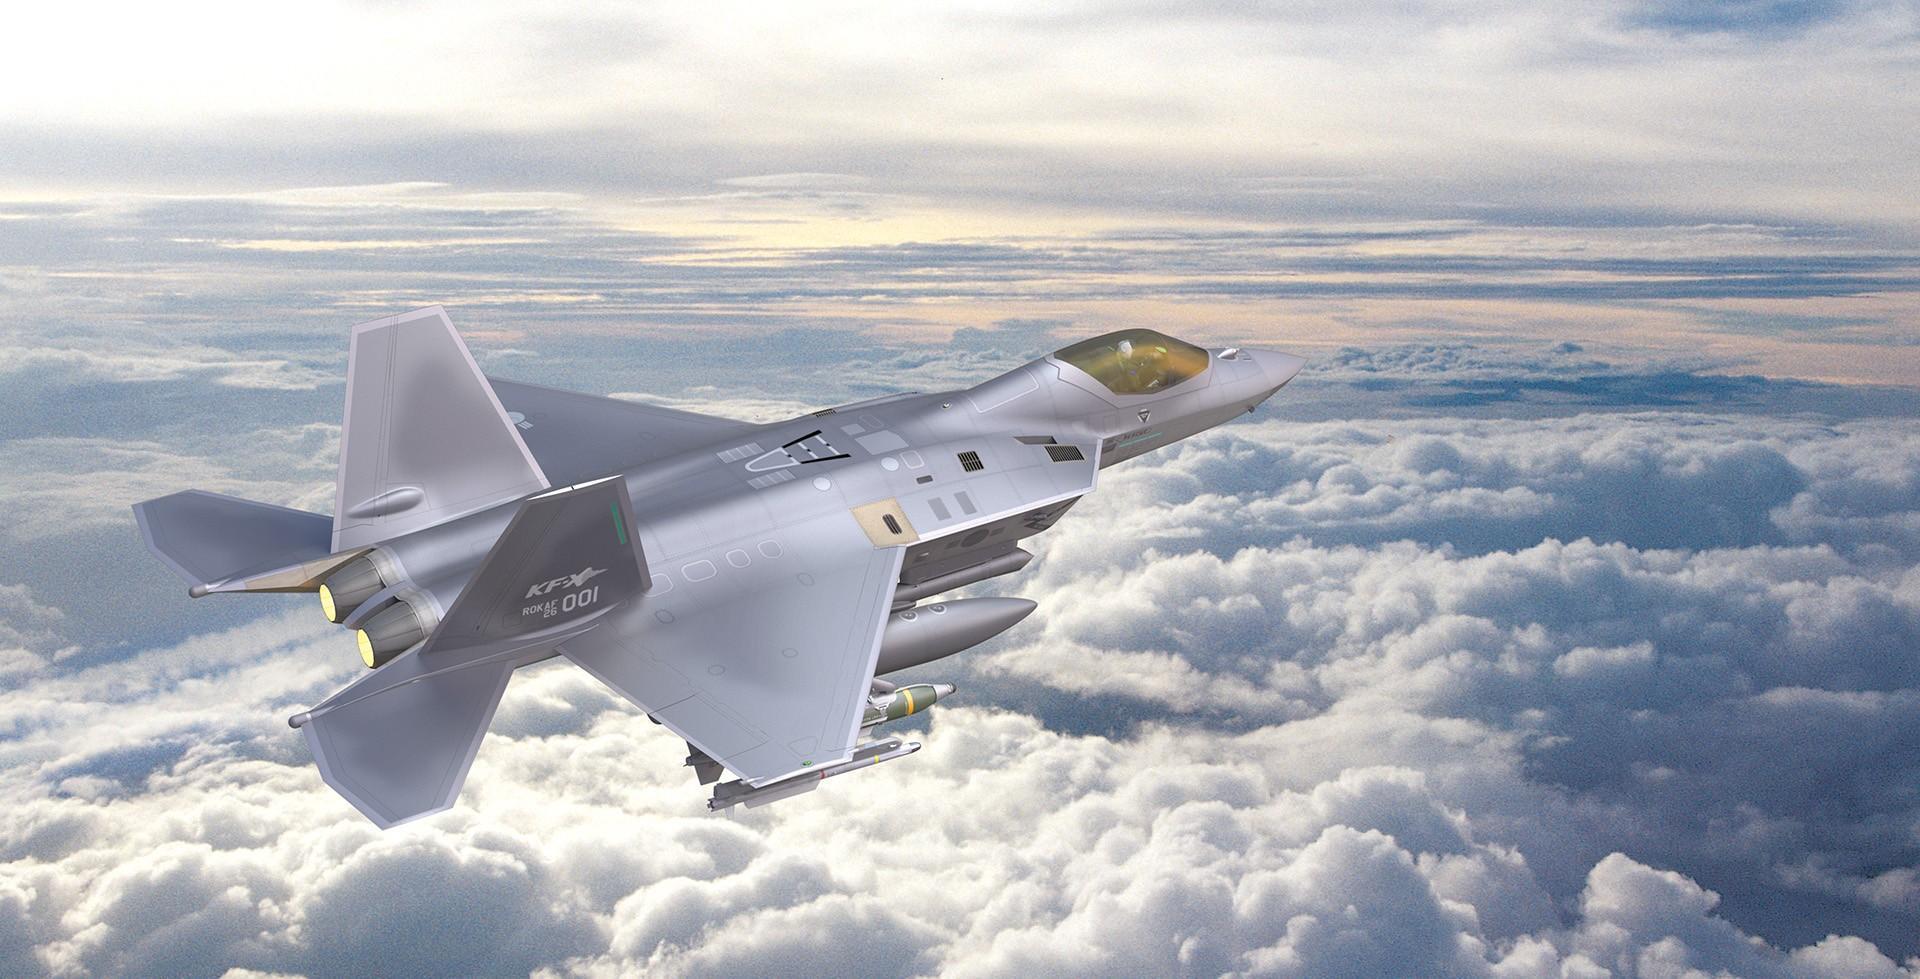 Korea Aerospace Industries (KAI) is expected to provide an update about the much-anticipated aircraft at ADEX 2021